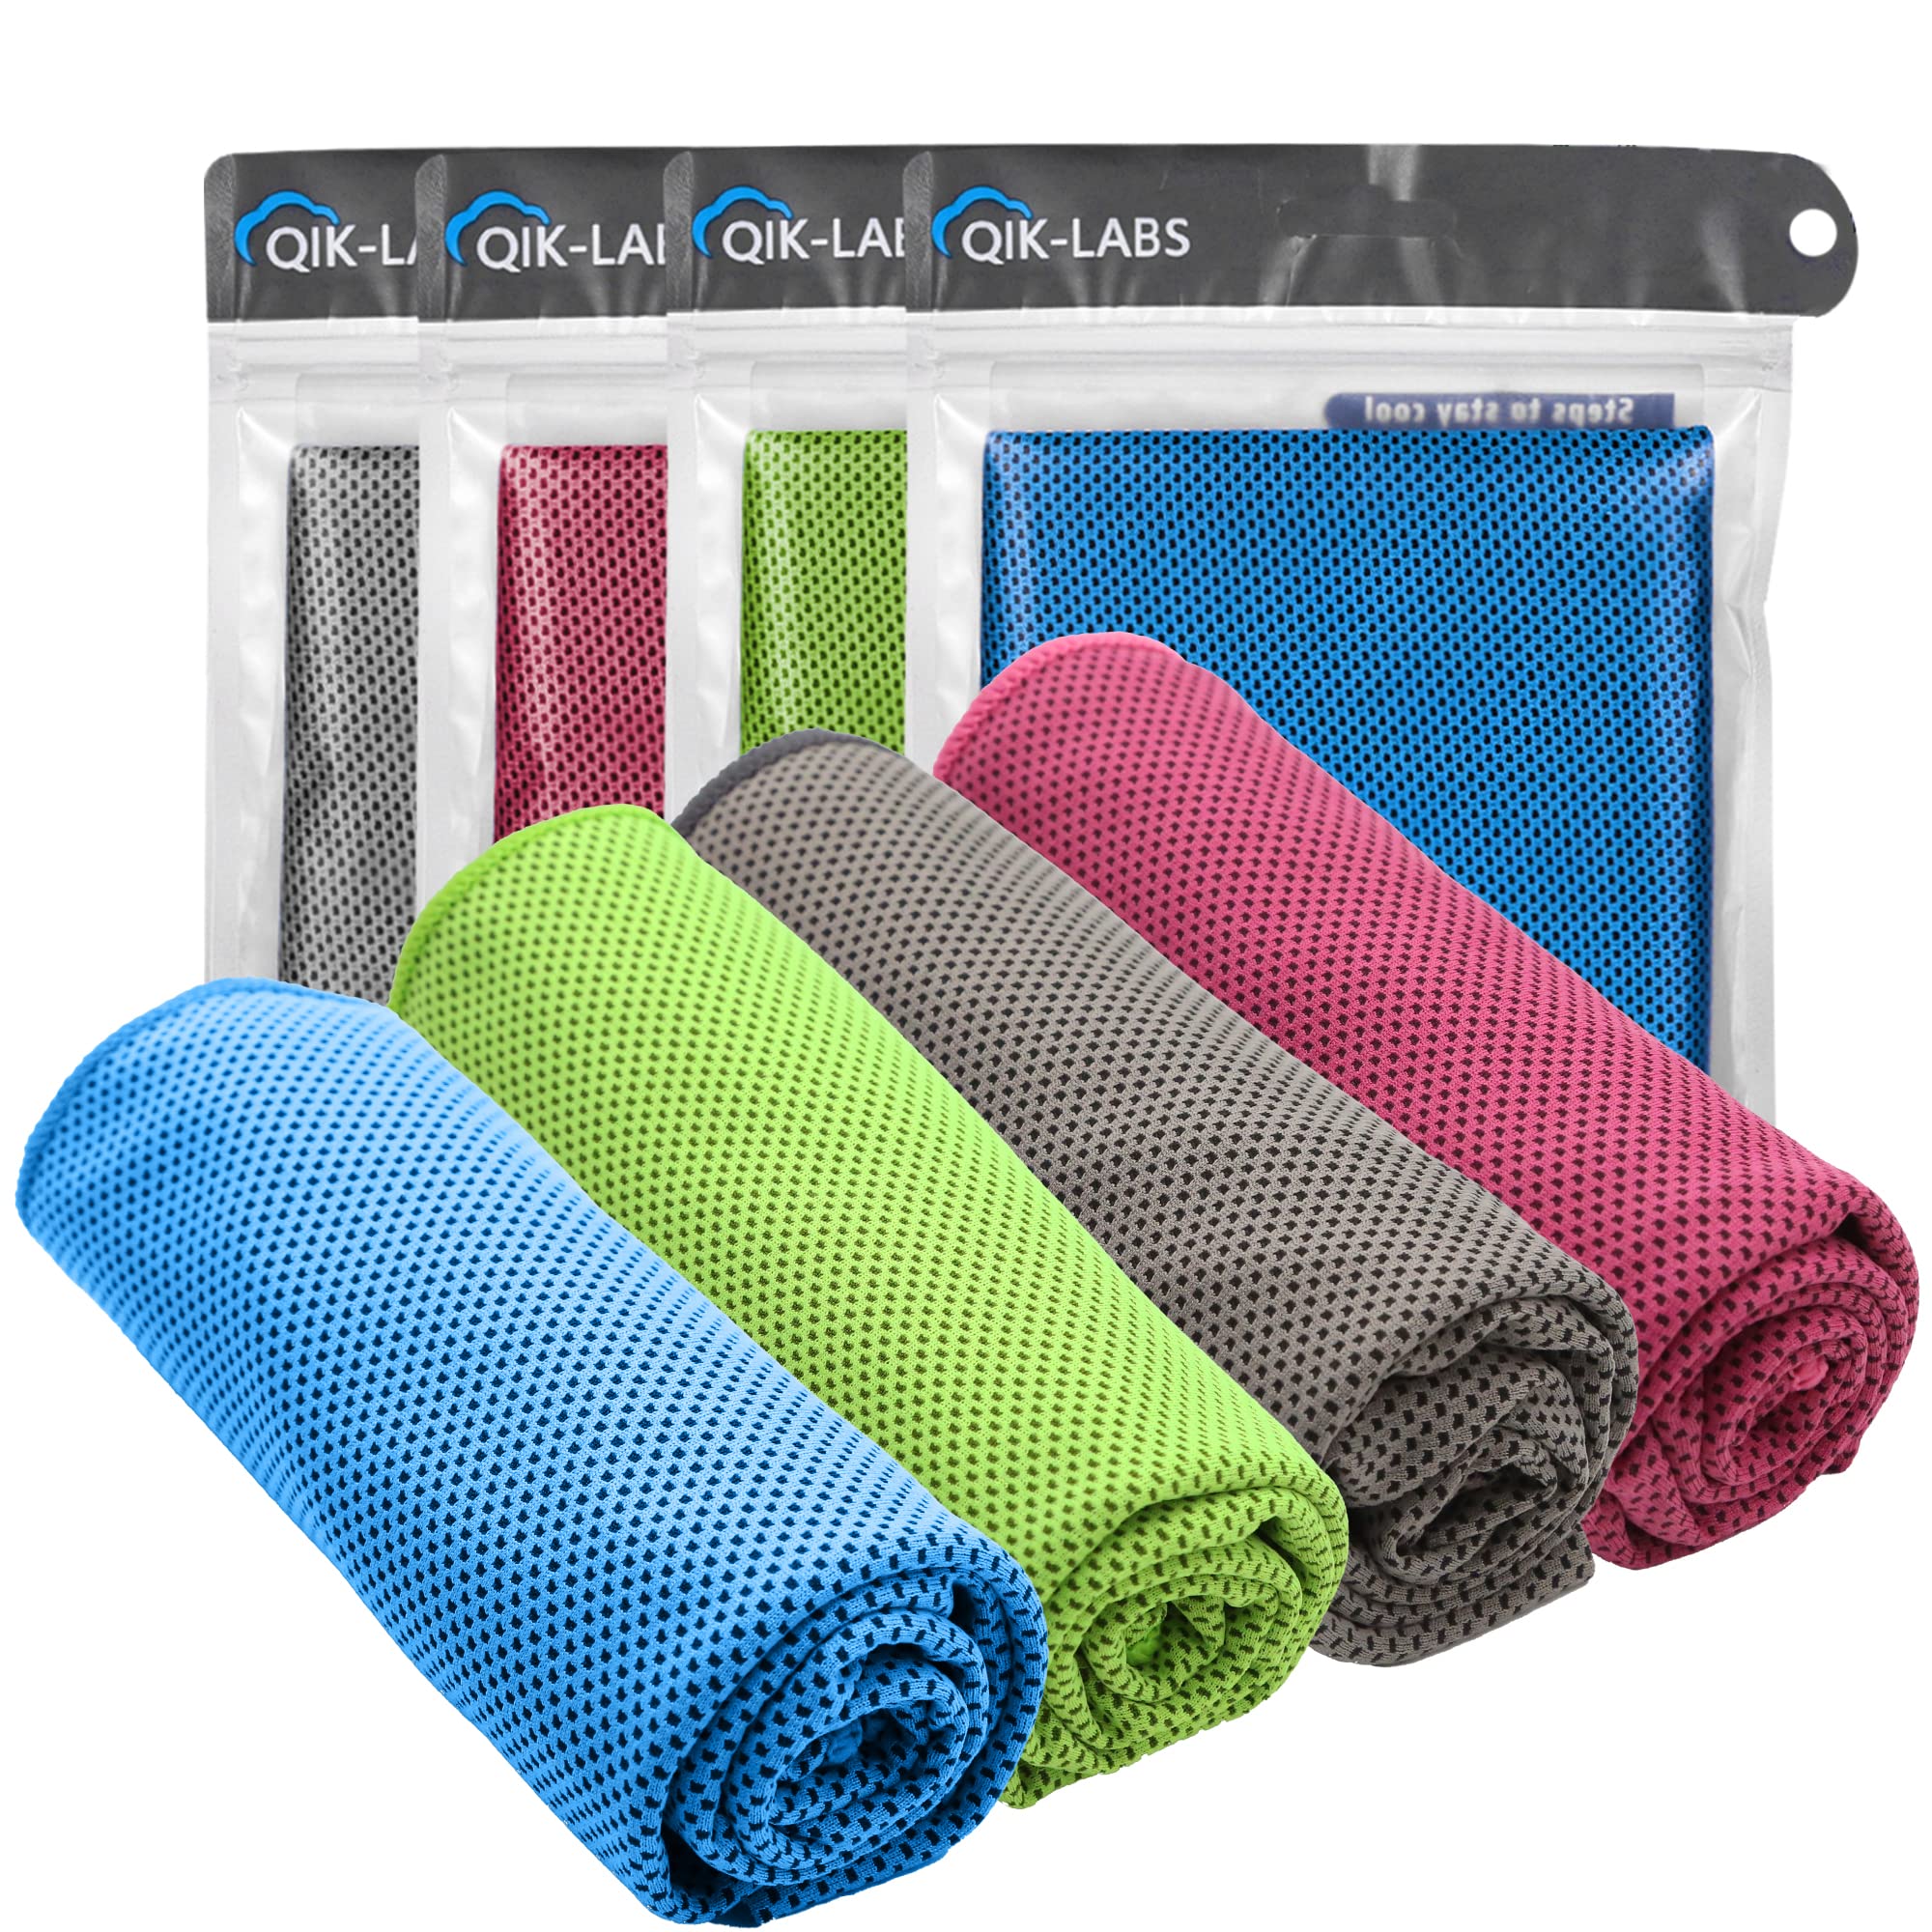 Cooling Towels for Neck and Face 4pc, Cooling Rag Cool Towels for